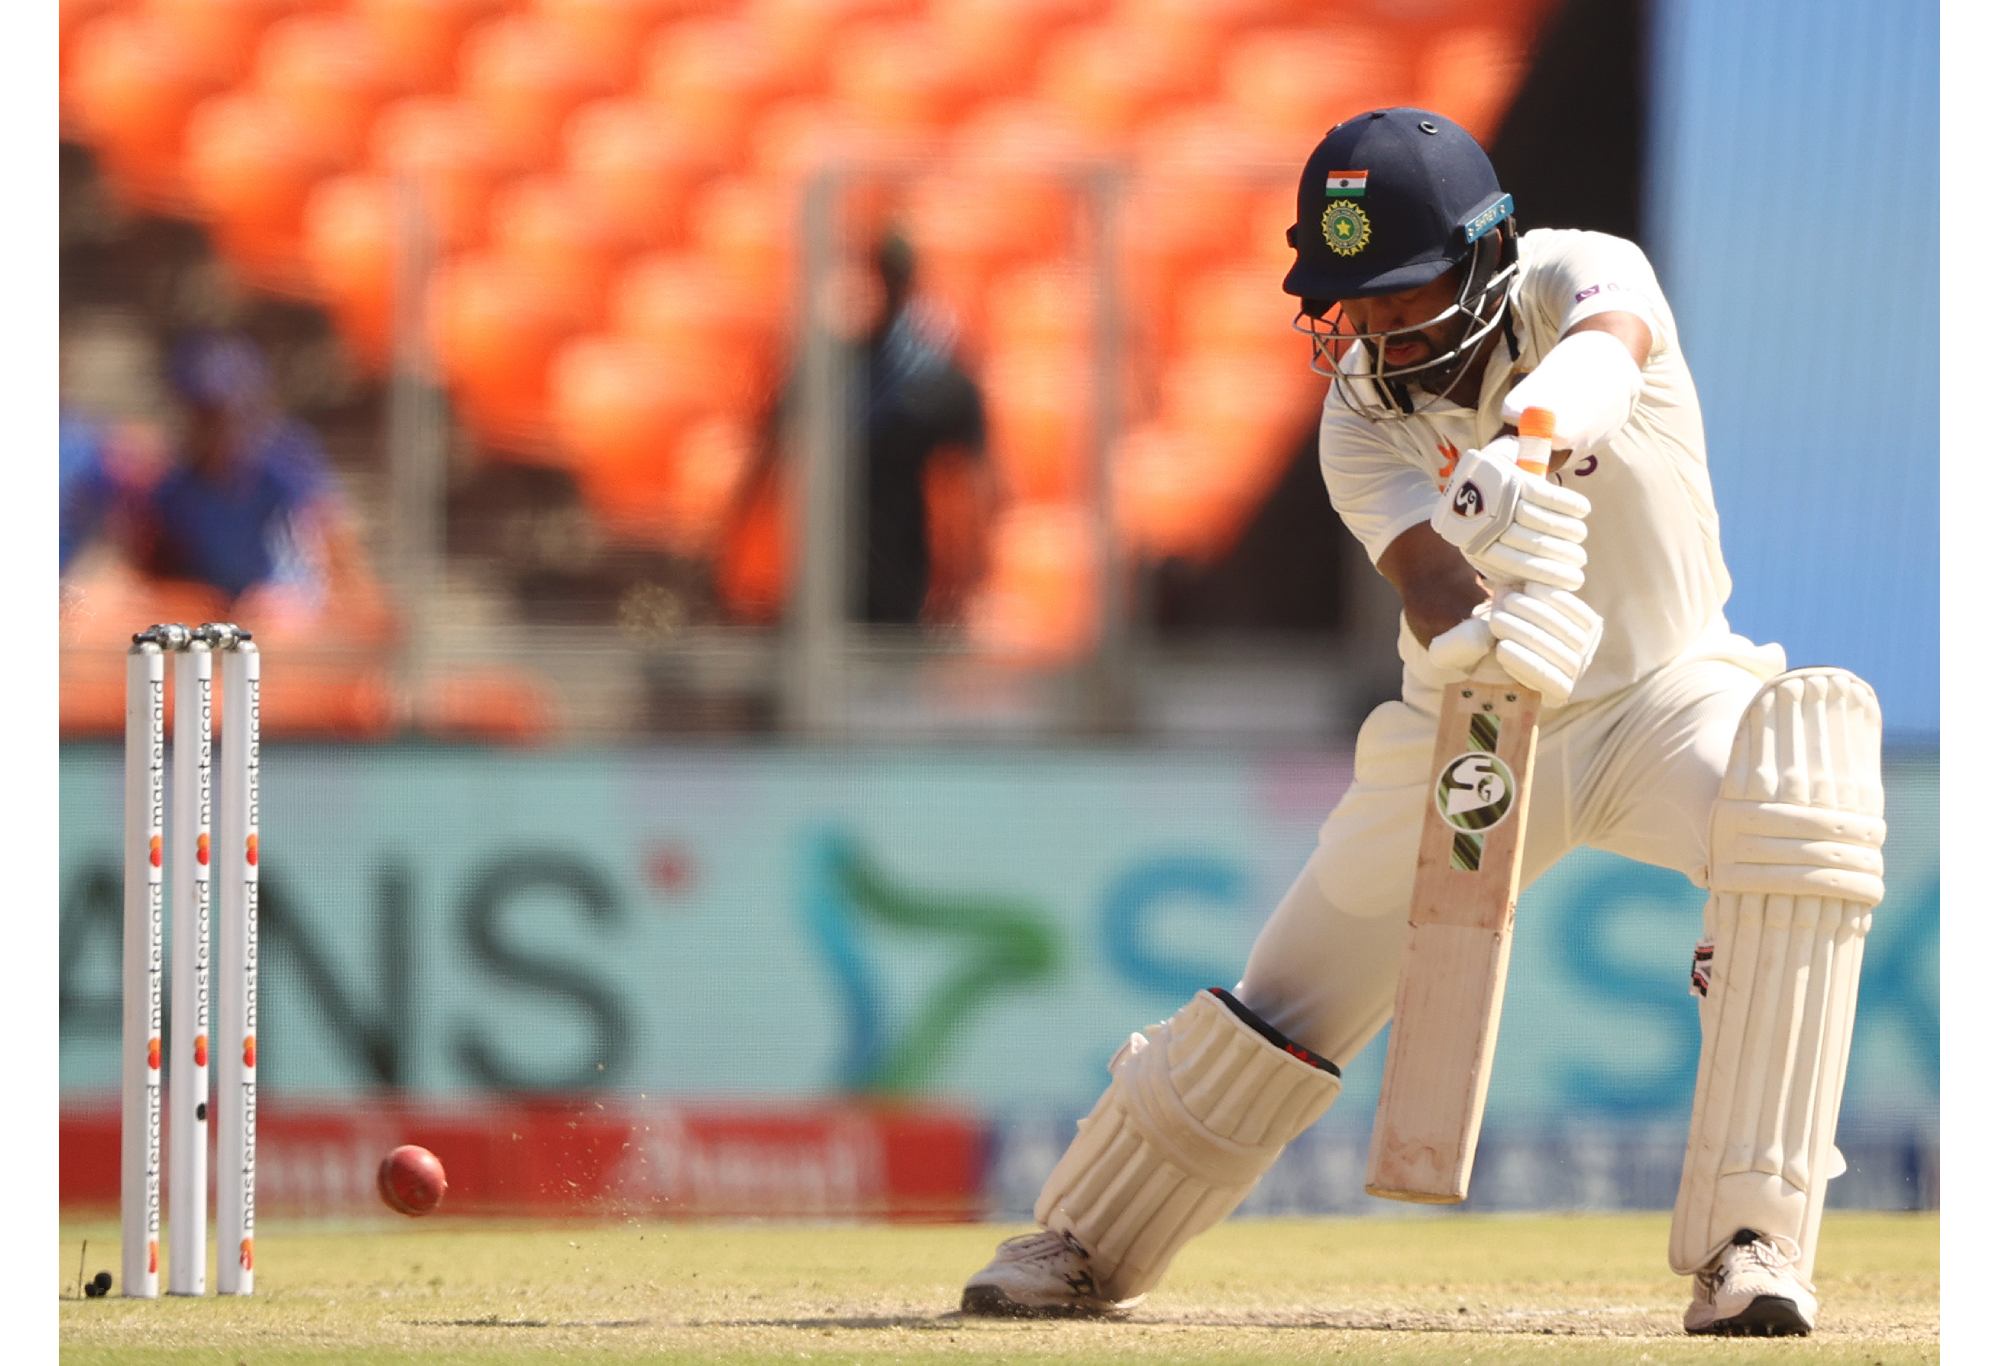 AHMEDABAD, INDIA - MARCH 11: Cheteshwar Pujara of India bats during day three of the Fourth Test match in the series between India and Australia at Narendra Modi Stadium on March 11, 2023 in Ahmedabad, India. (Photo by Robert Cianflone/Getty Images)